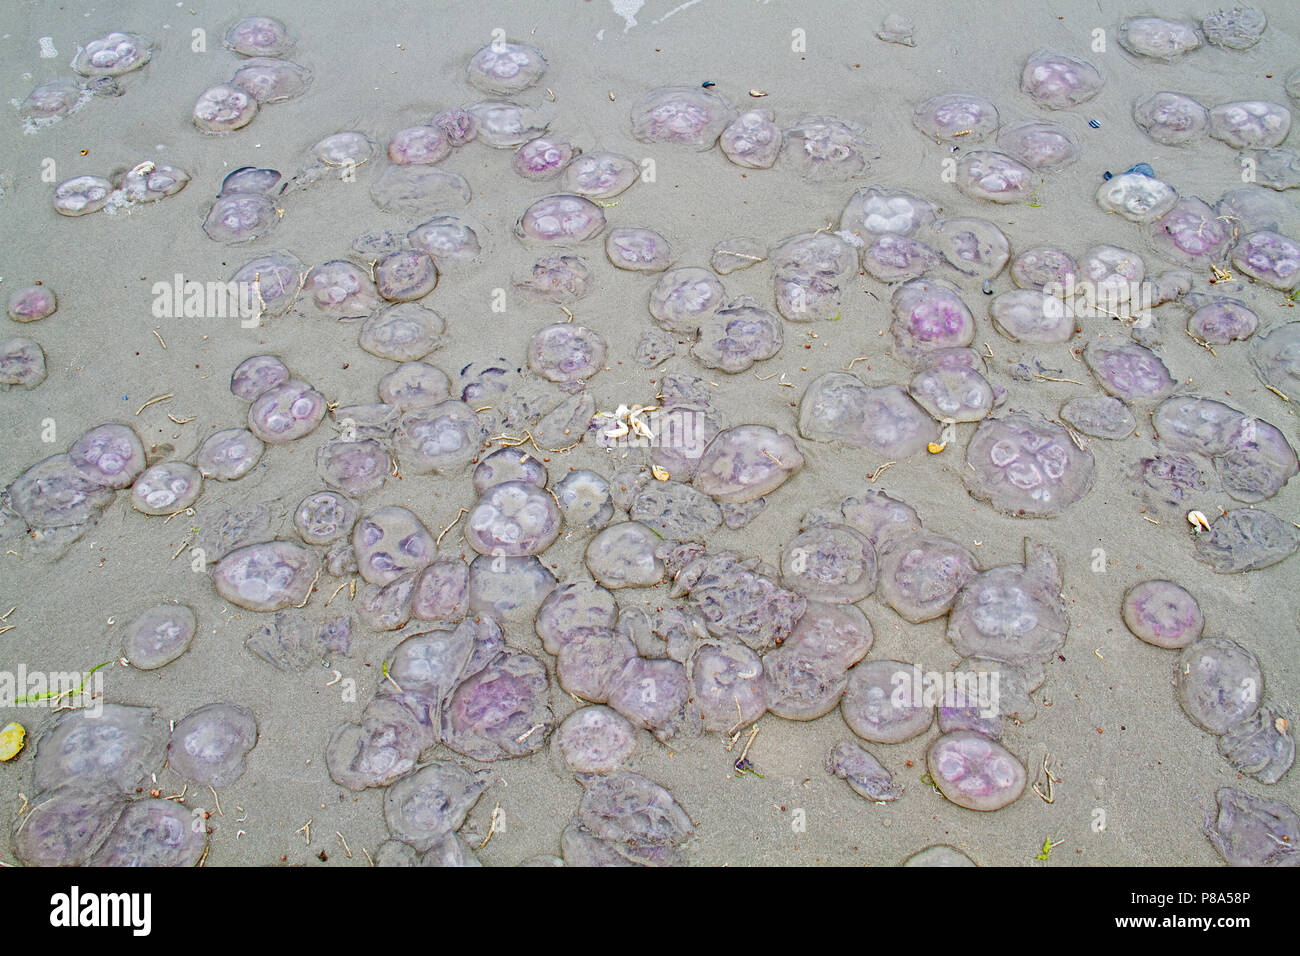 Thousands of Common Jellyfish, also known as Moon jellyfish, stranded on the beach Stock Photo